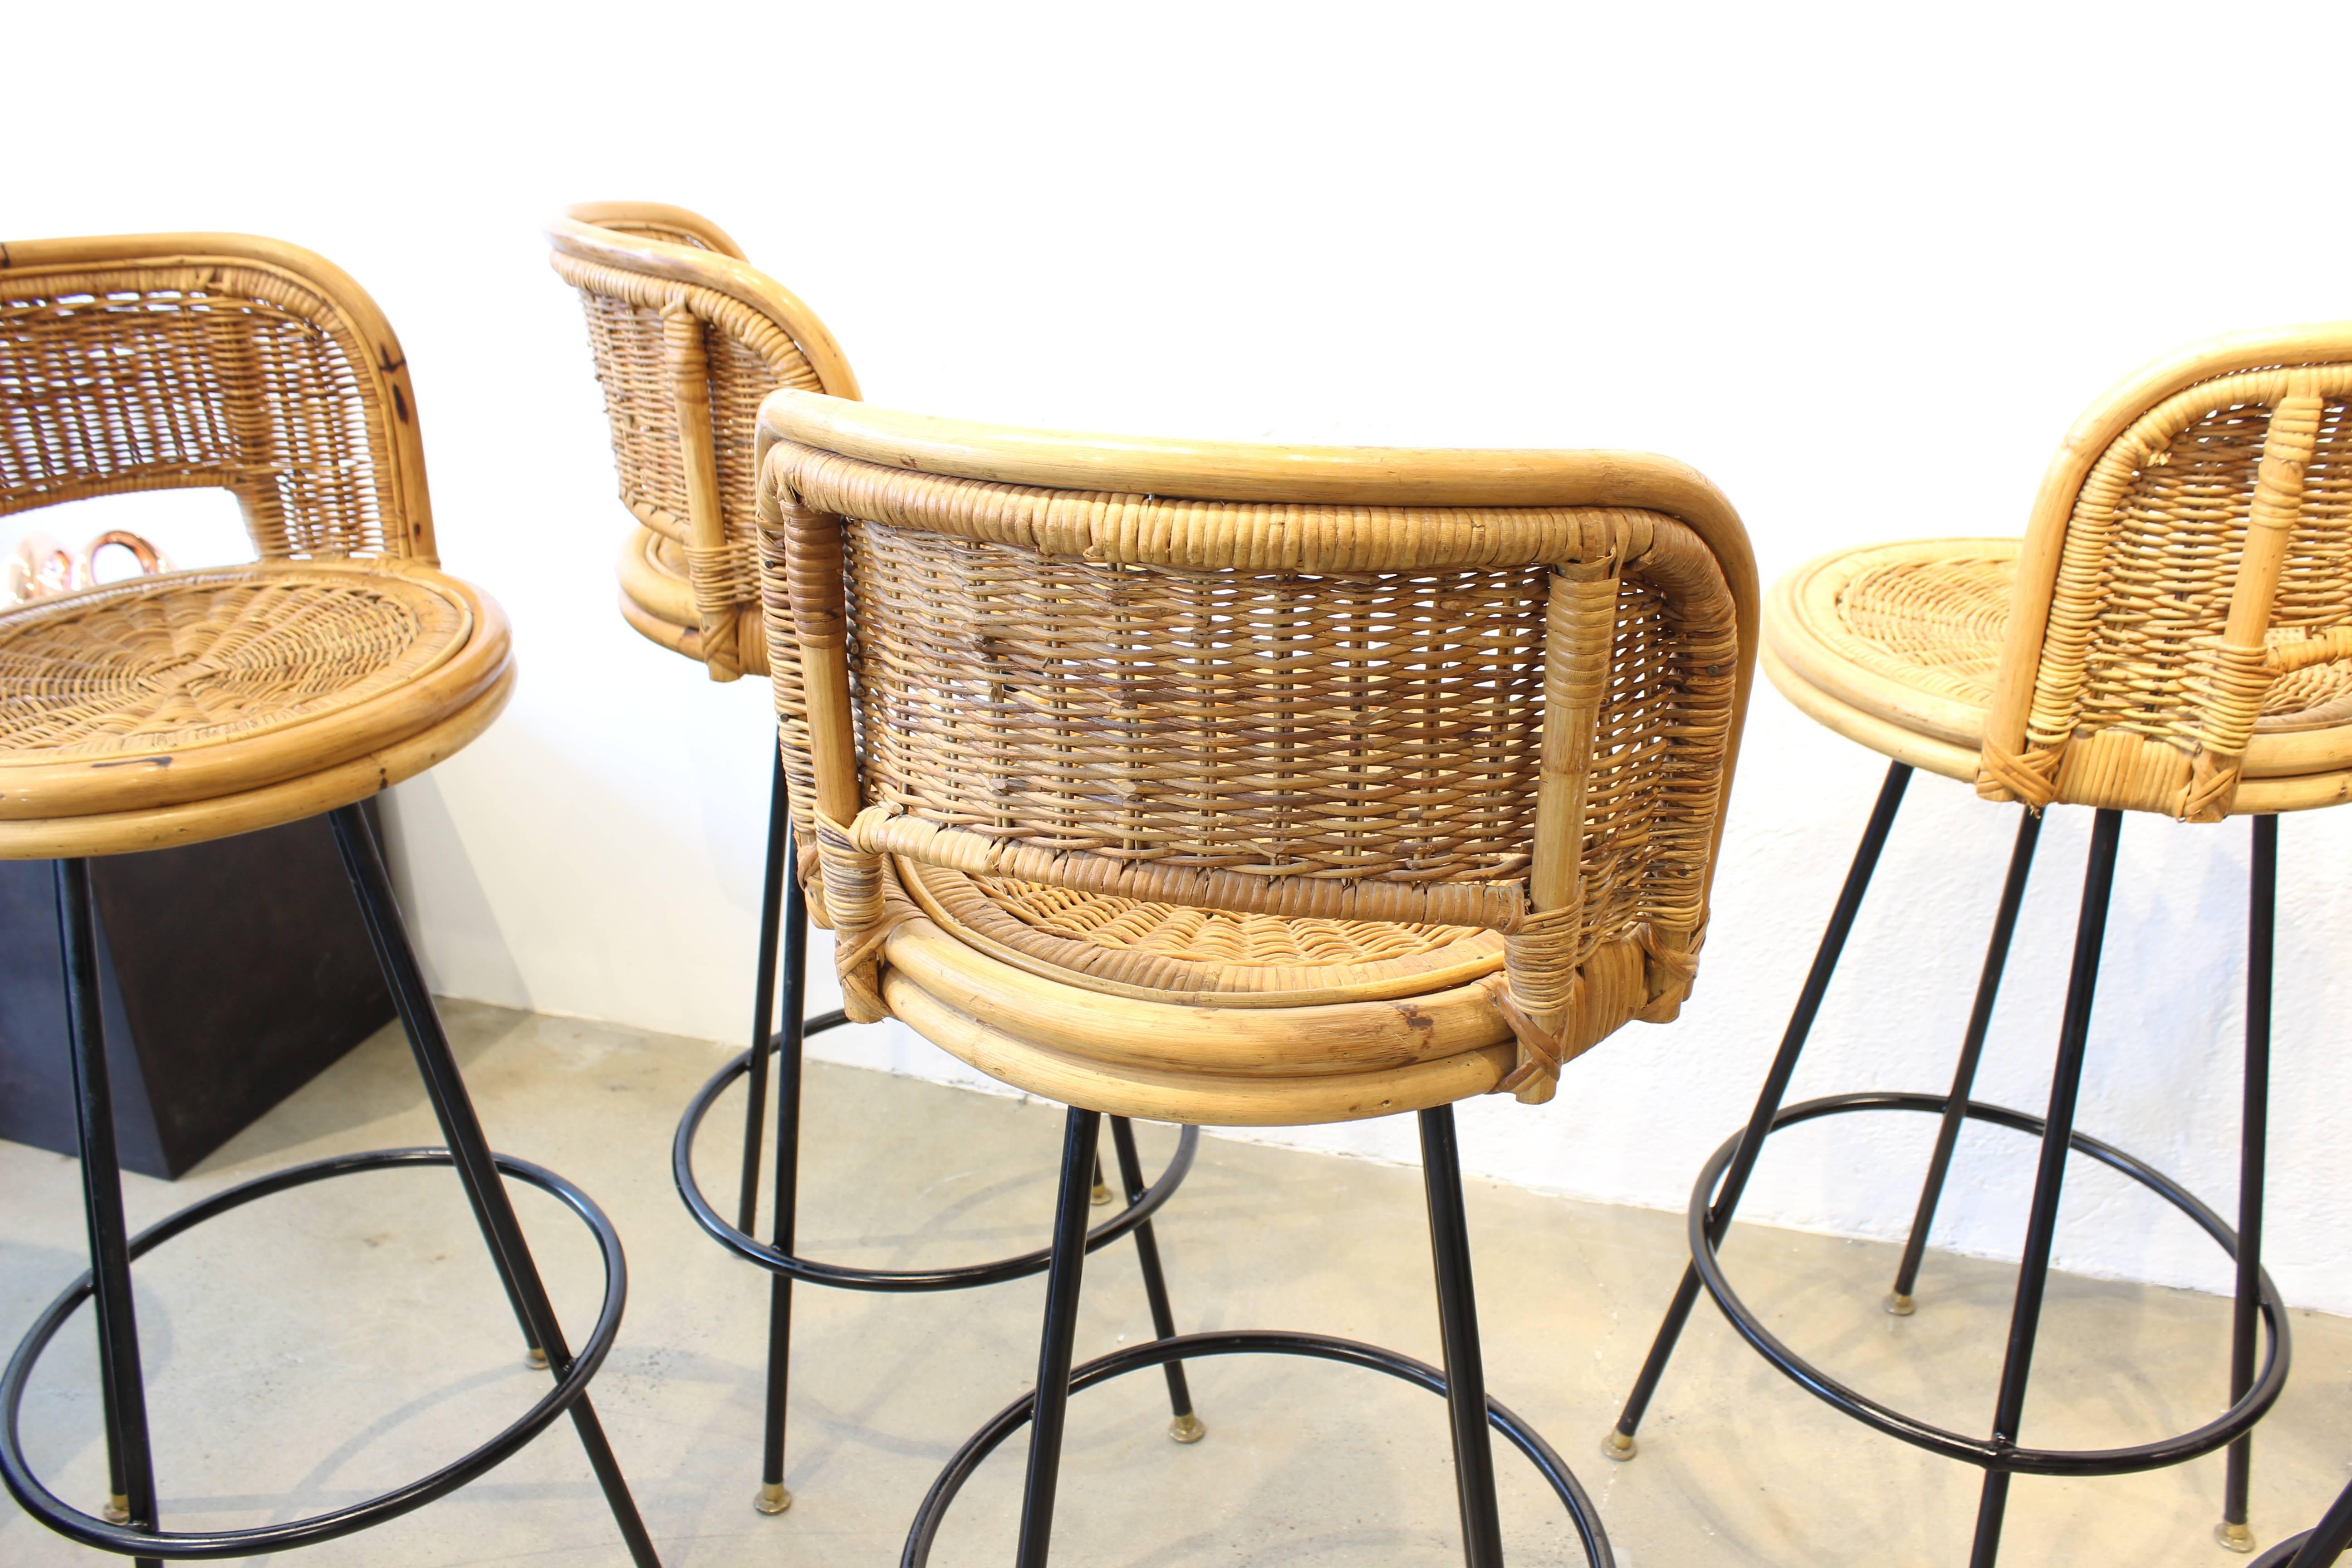 American Set of Pristine Rattan and Wrought Iron Bar Stools by Seng of Chicago, 1950s